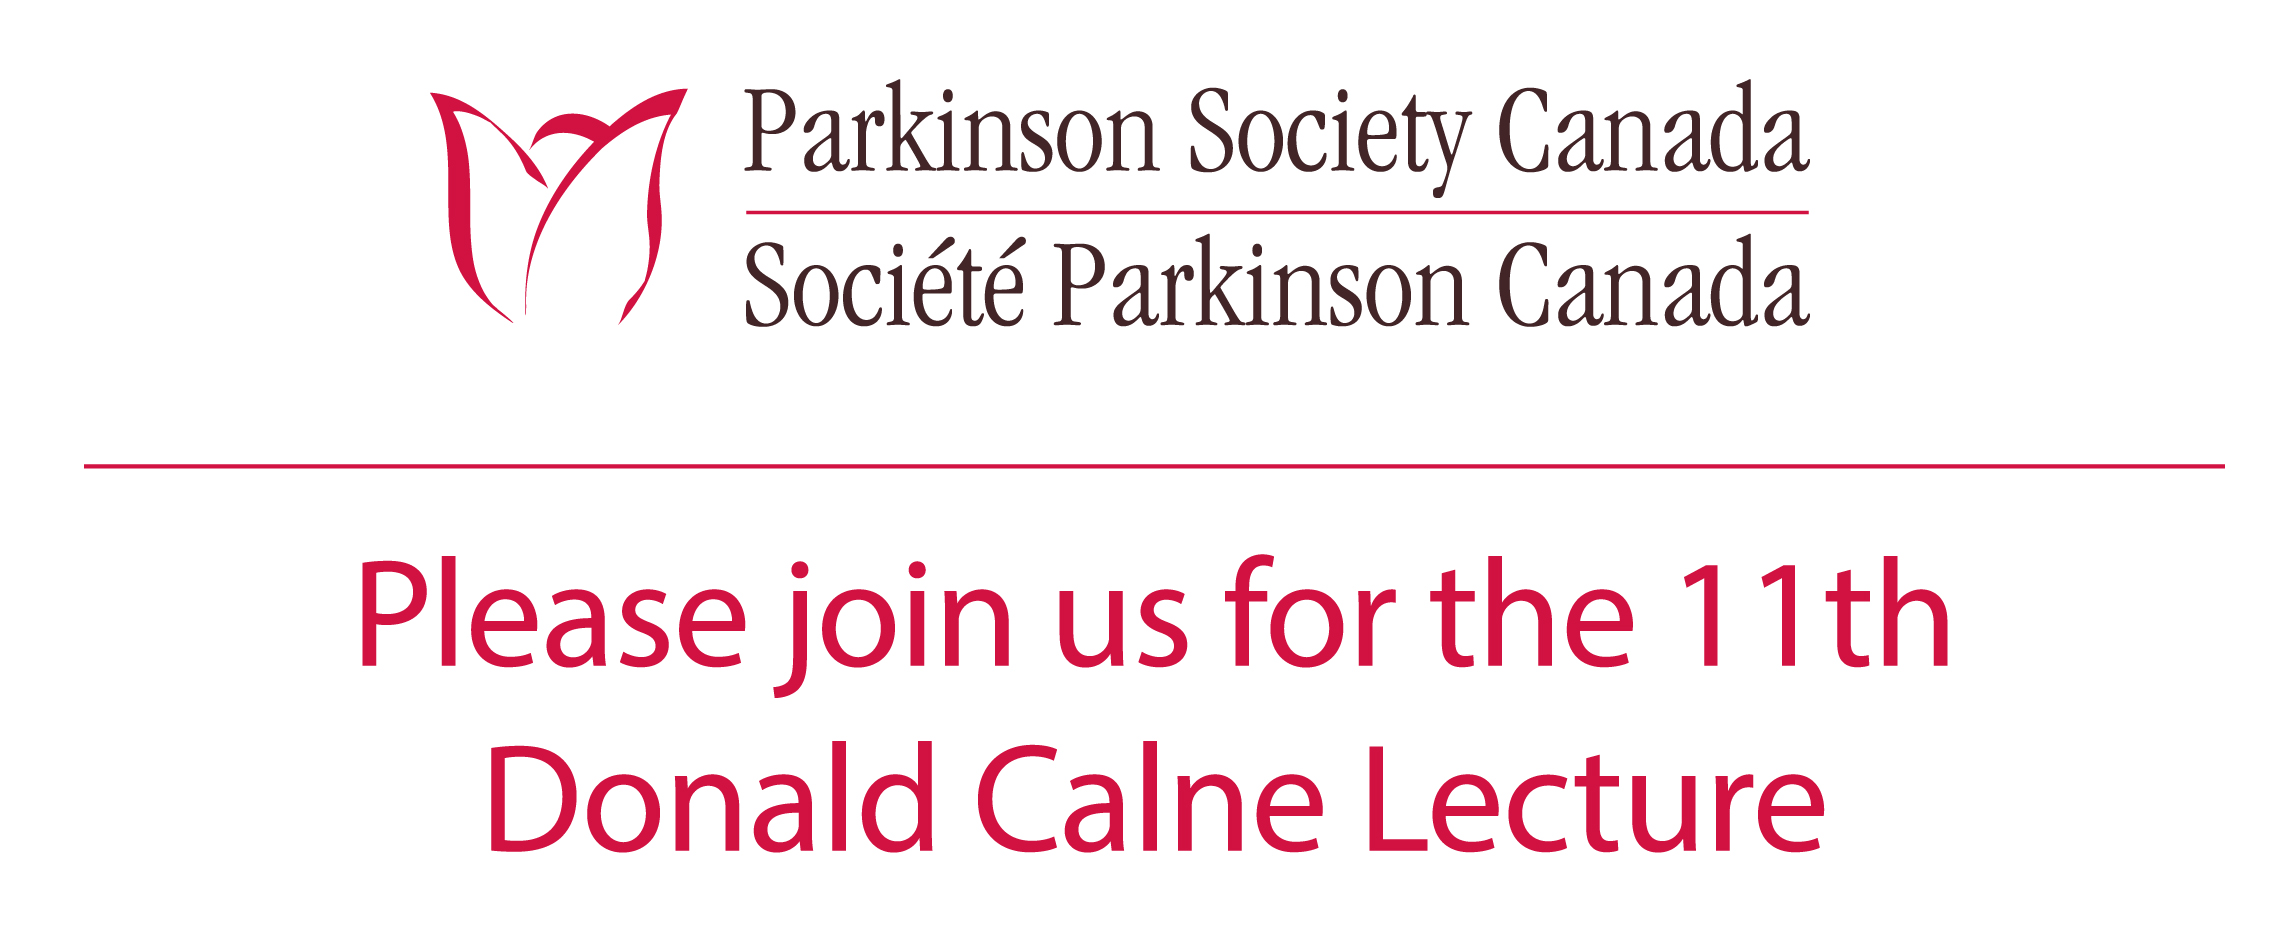 Donald Calne Lecture - May 26